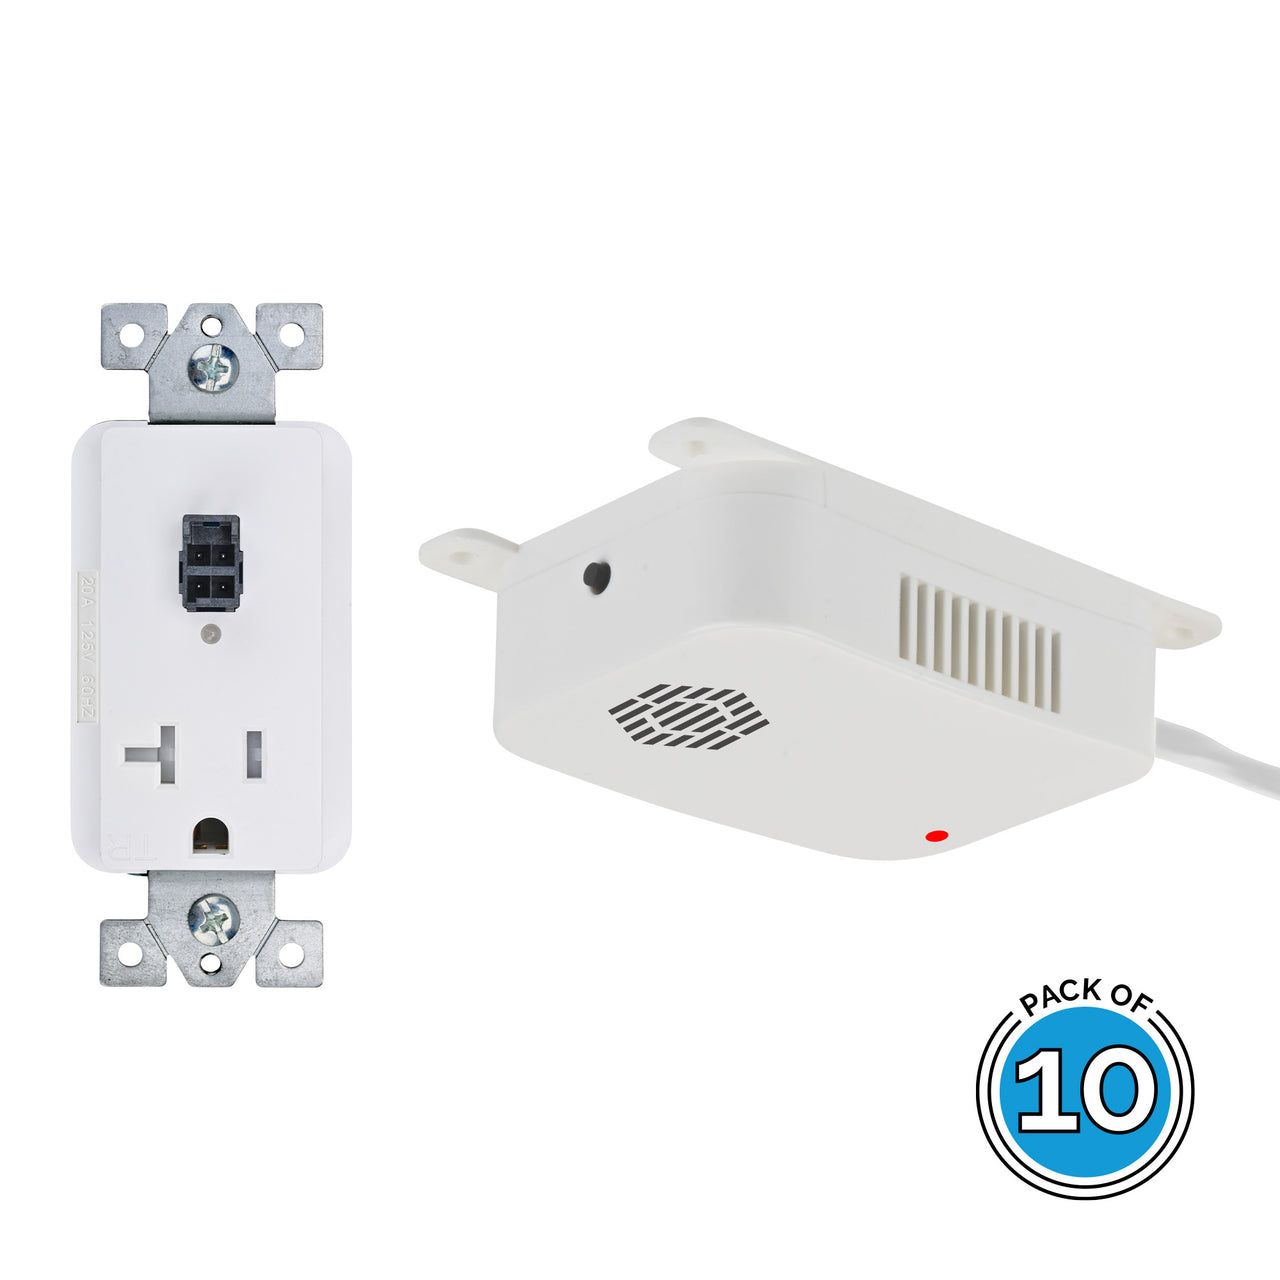 20 amp Fire Guard Outlet